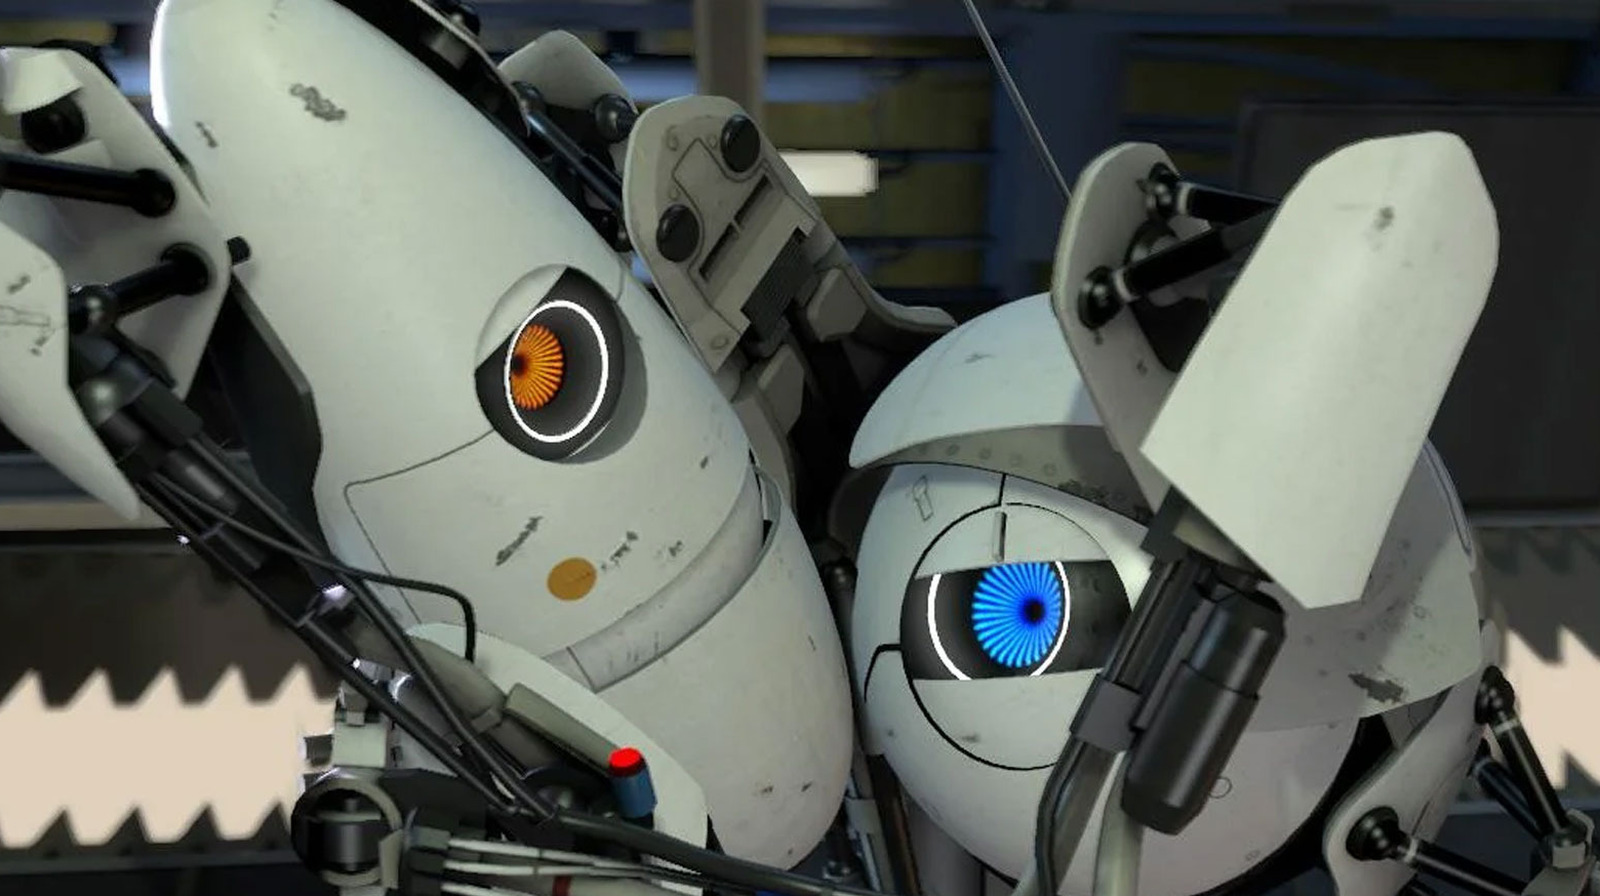 Portal 2 improves brain training more than software designed for that, says  science